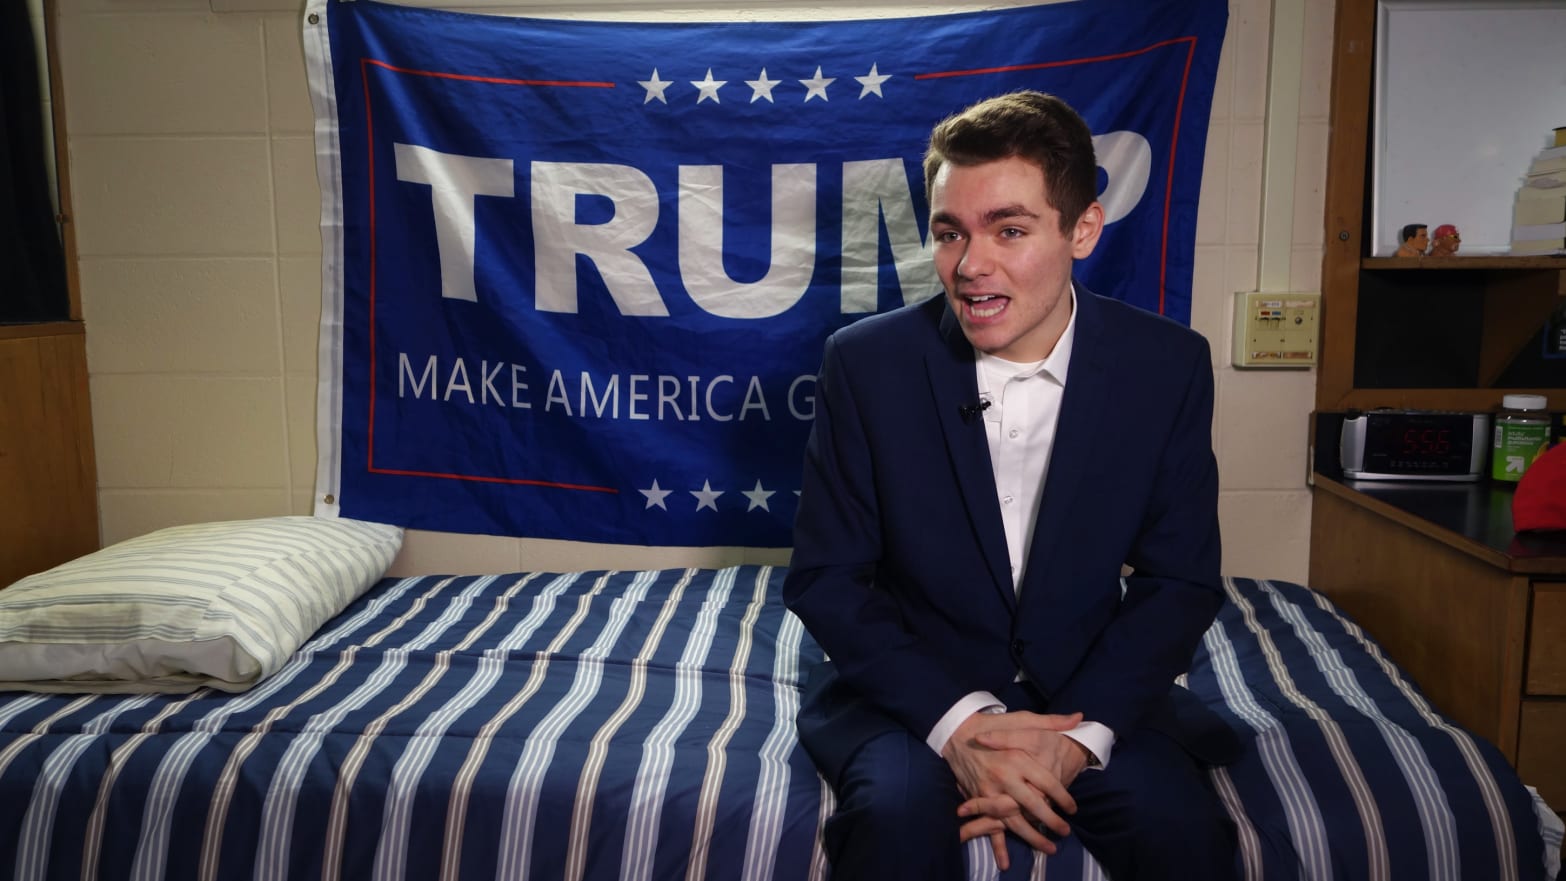 Conservative student and supporter of US President Donald Trump, Nick Fuentes